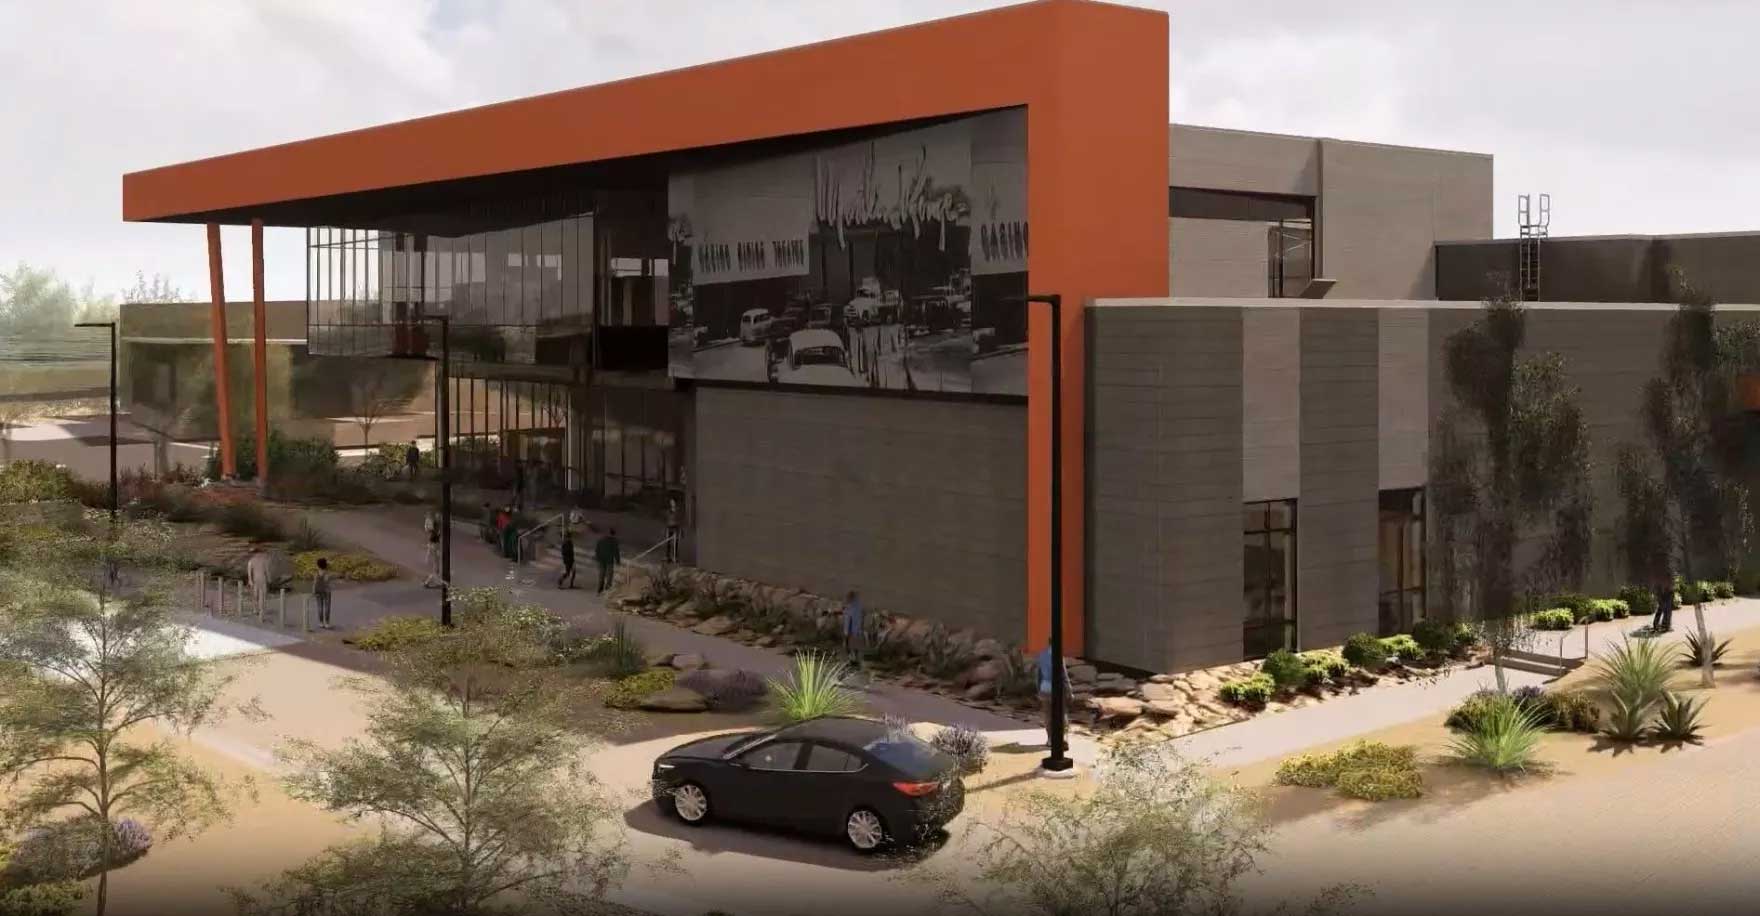 A rendering of the new West Las Vegas Library, opening in 2025.